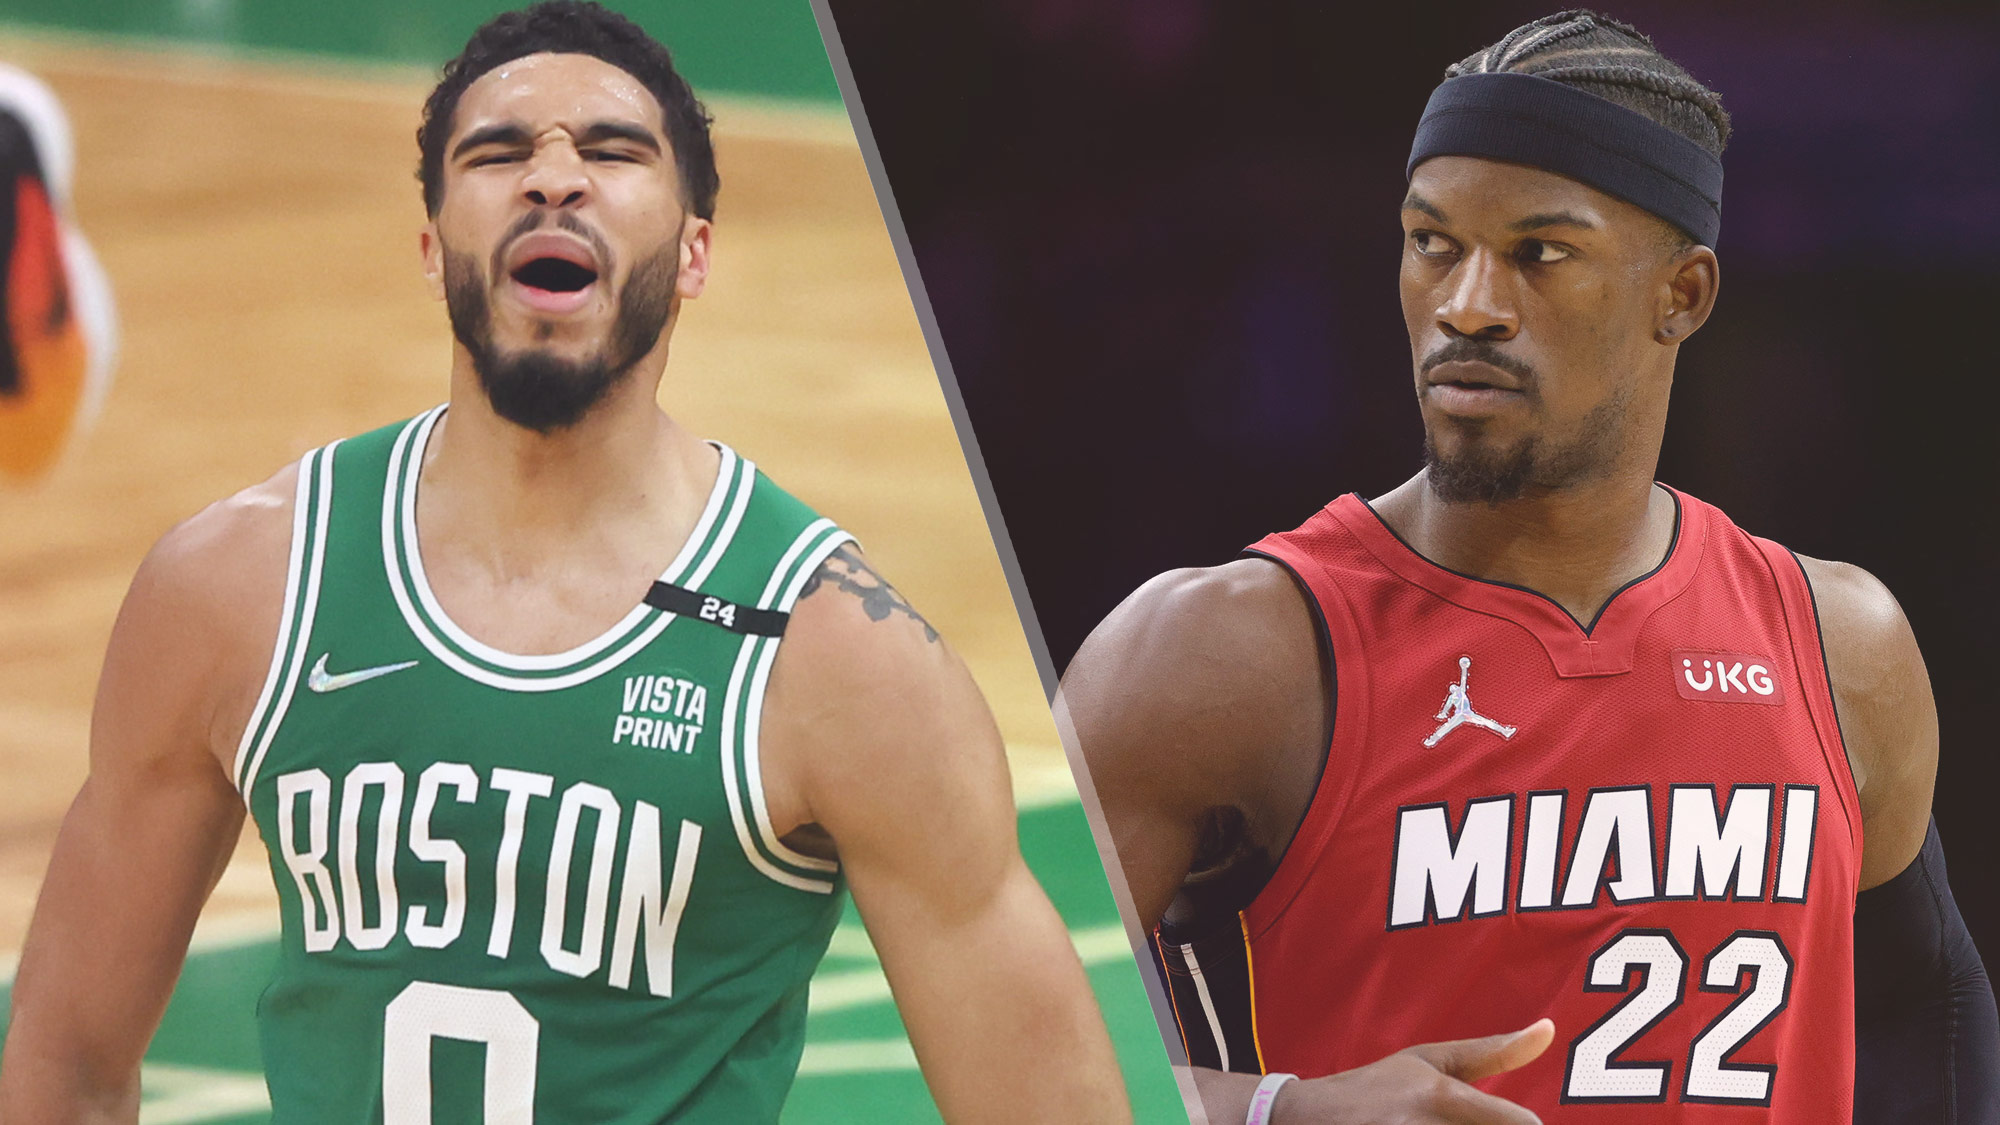 Celtics vs Heat live stream: How to watch game 1 of NBA Playoffs Eastern Conference Finals online